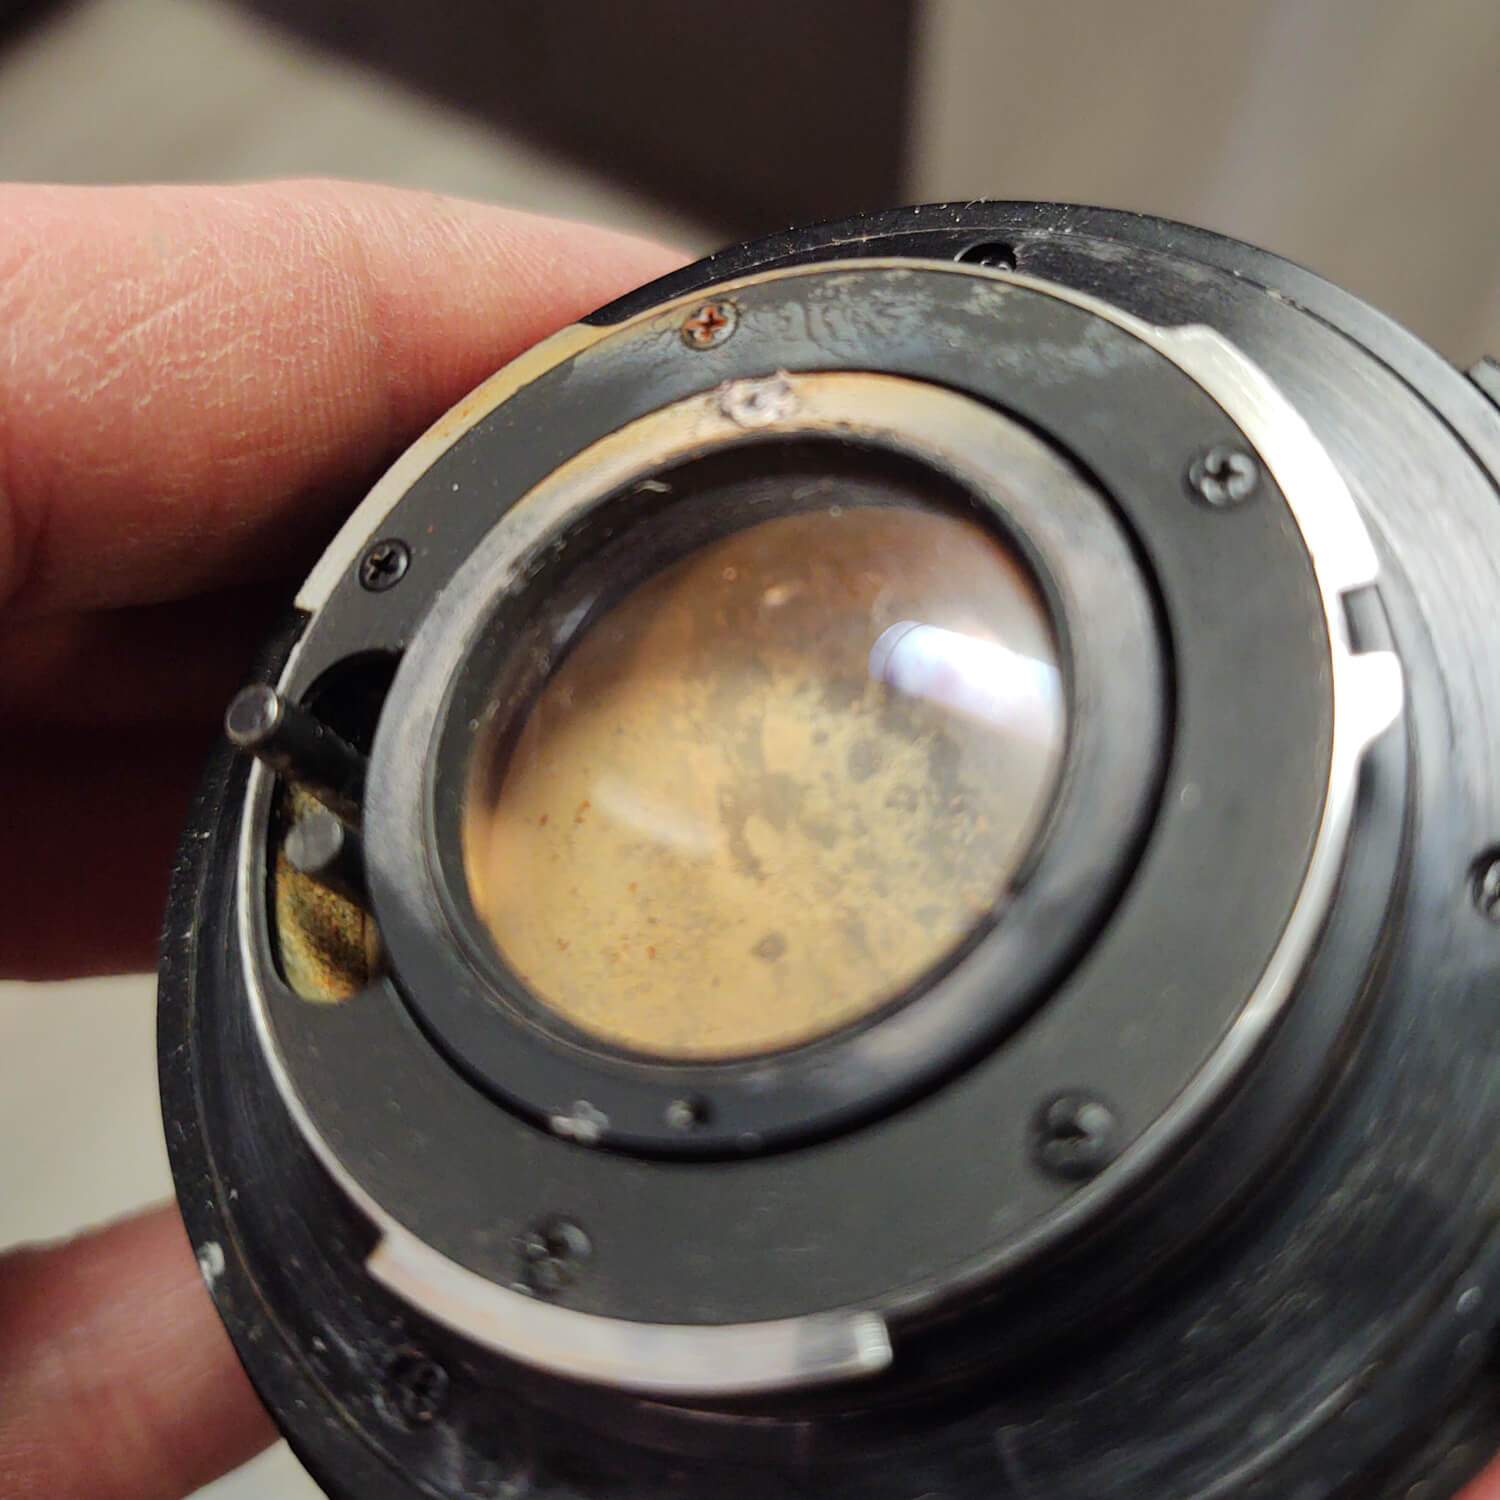 Restoring the moldiest, most rusty camera lens I’ve ever seen: How bad (or good) could it be?